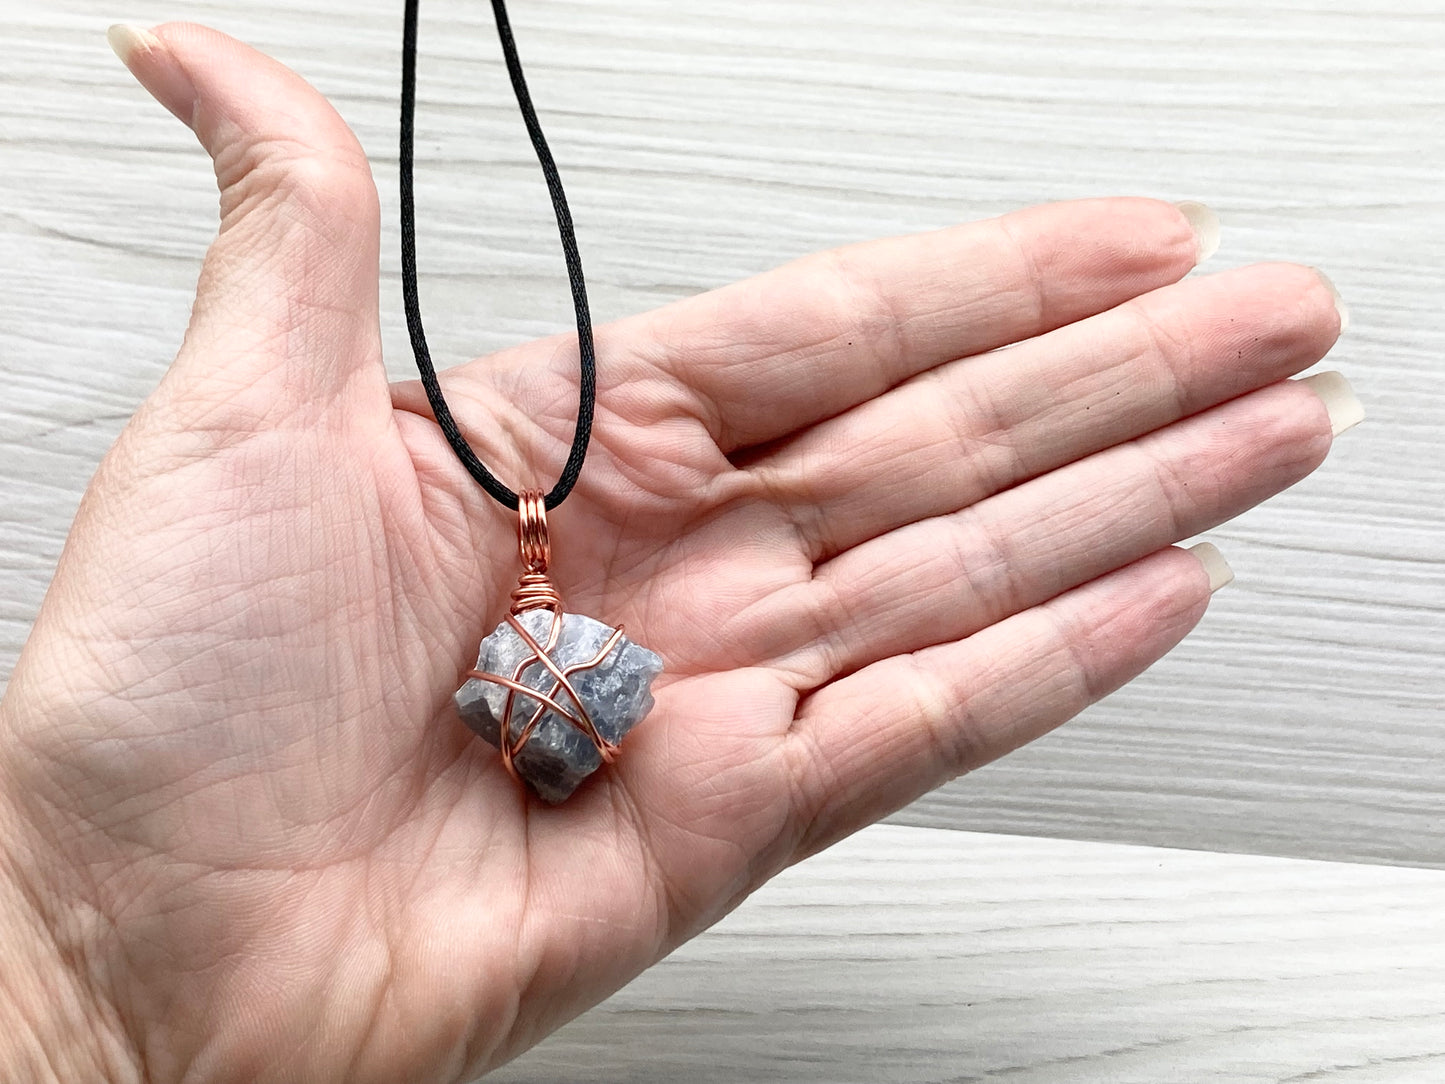 Blue Calcite Necklace. Copper Wire Wrapped Raw Crystal Pendant. Handmade New Age Jewelry. Comes On A Black Chain. Wiccan Pagan Style Jewelry.